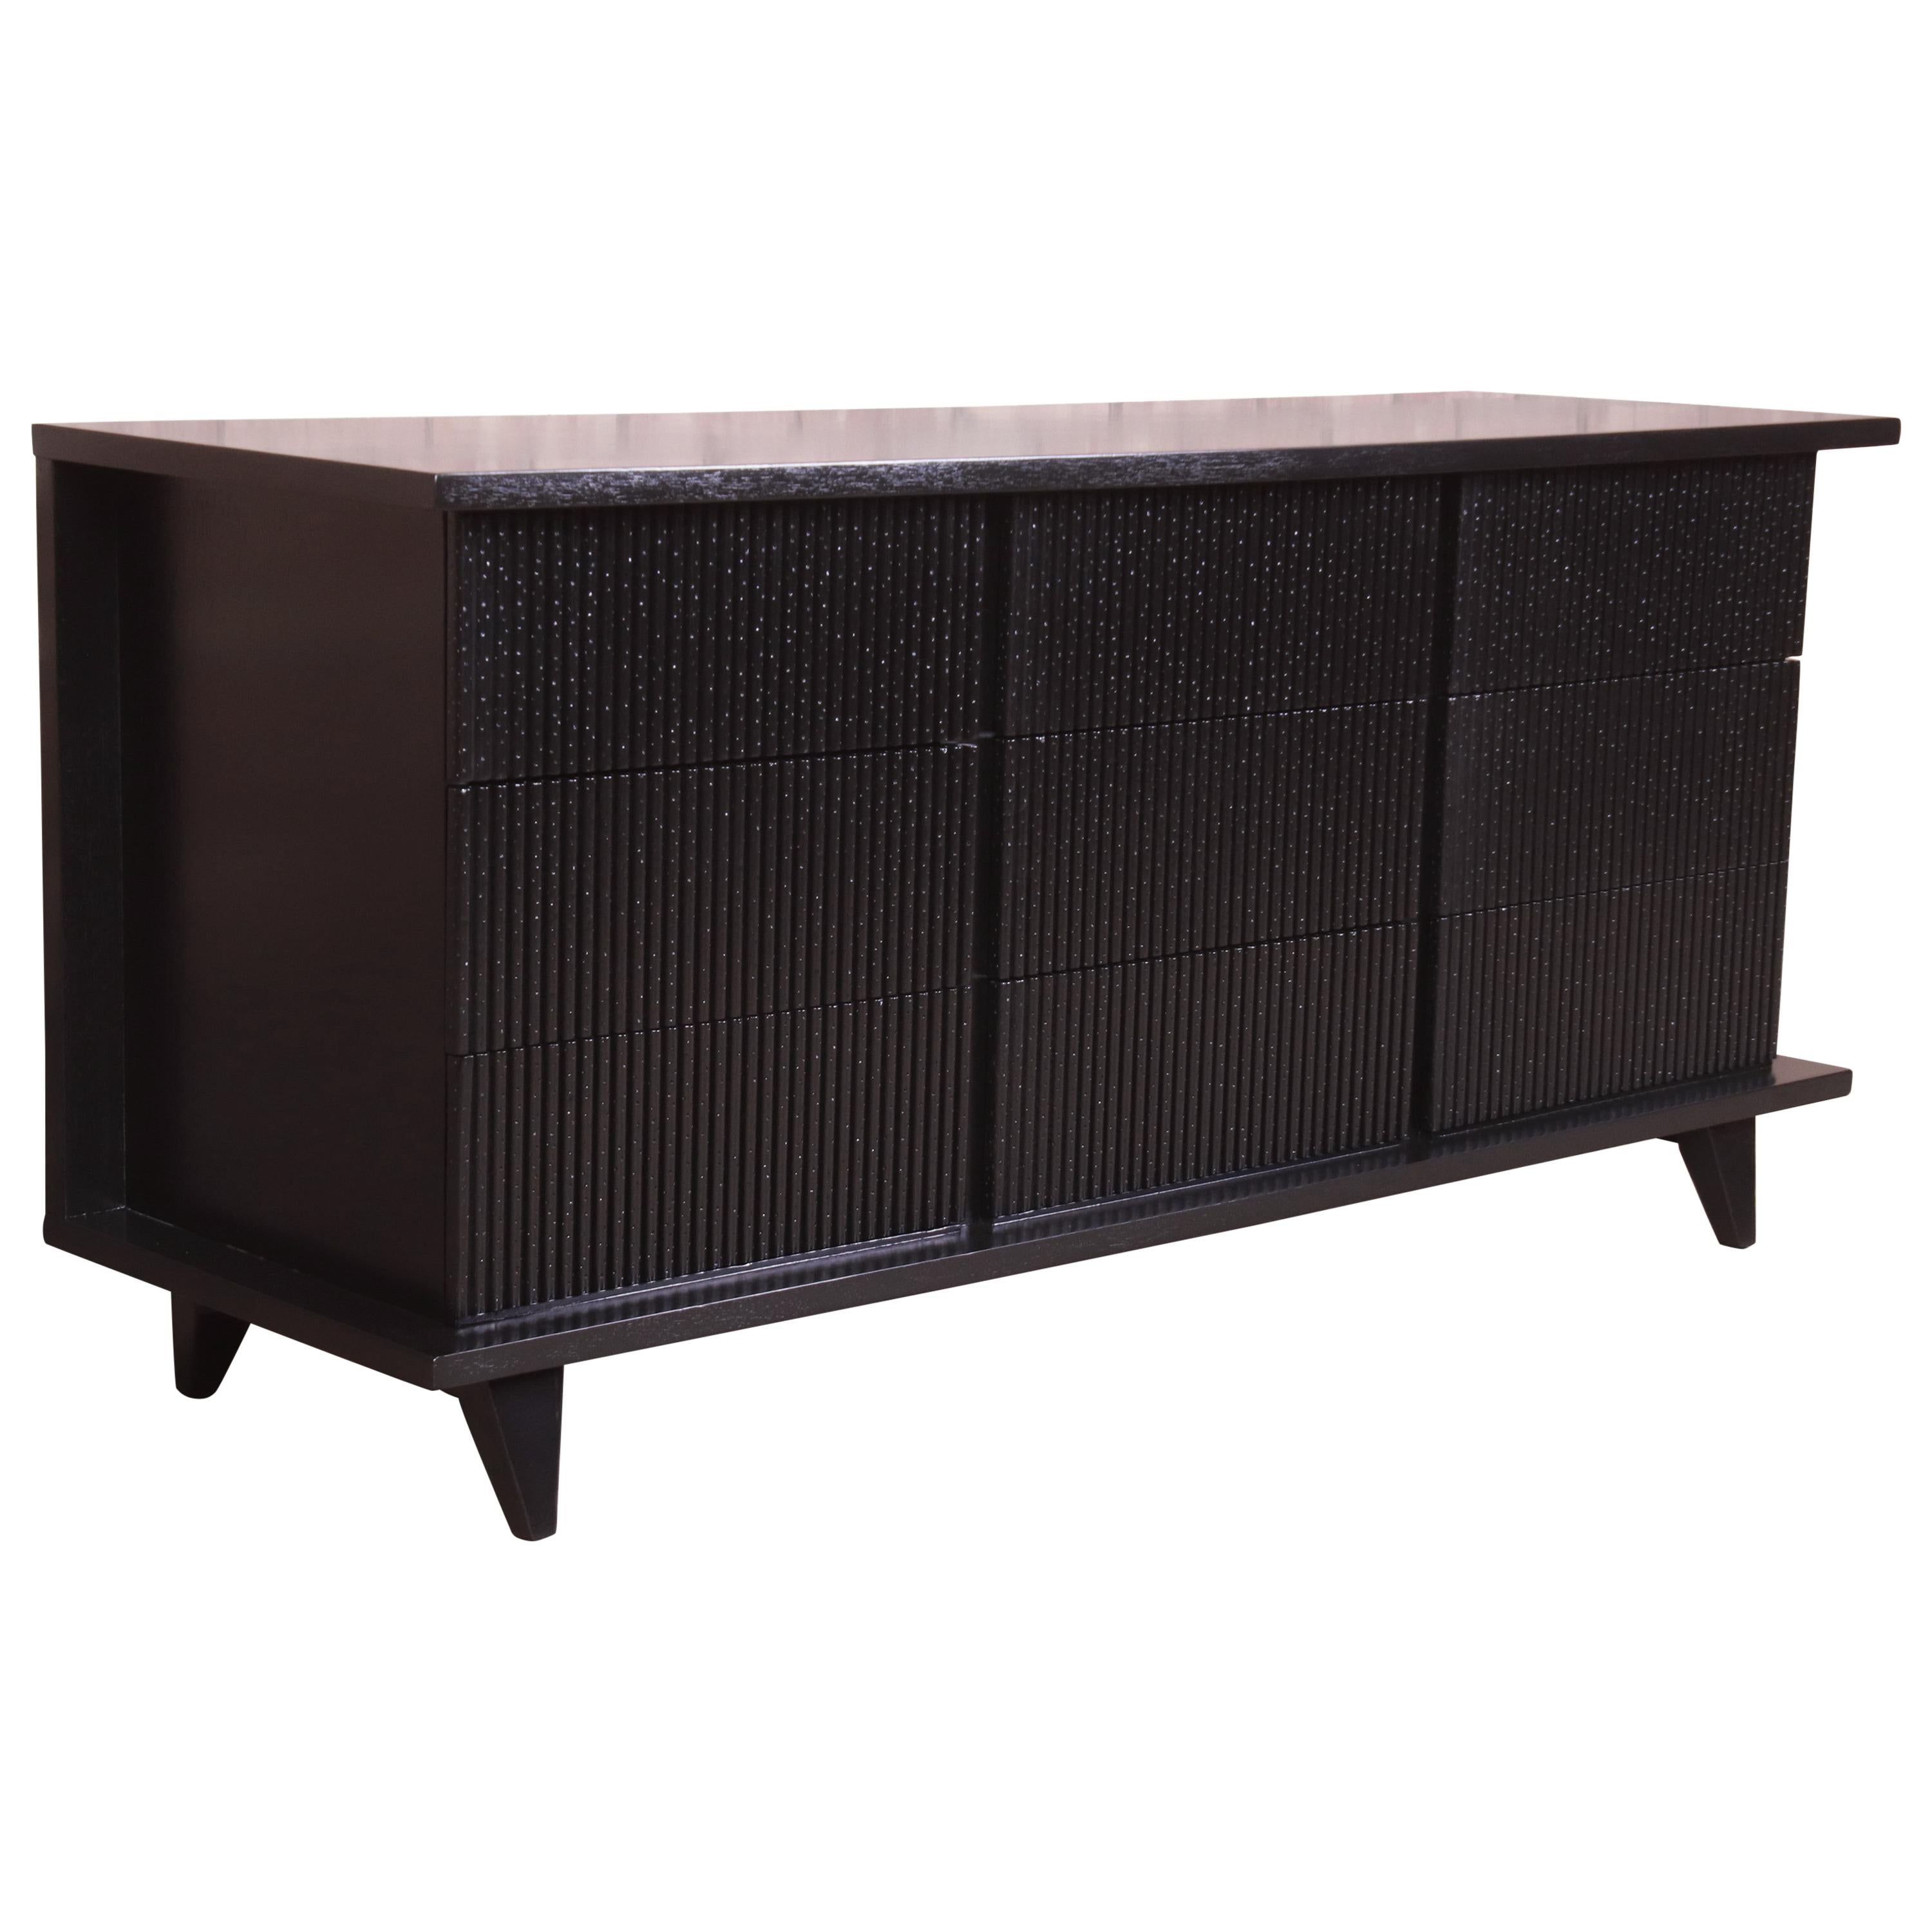 Merton Gershun Black Lacquered Triple Dresser or Credenza, Newly Refinished